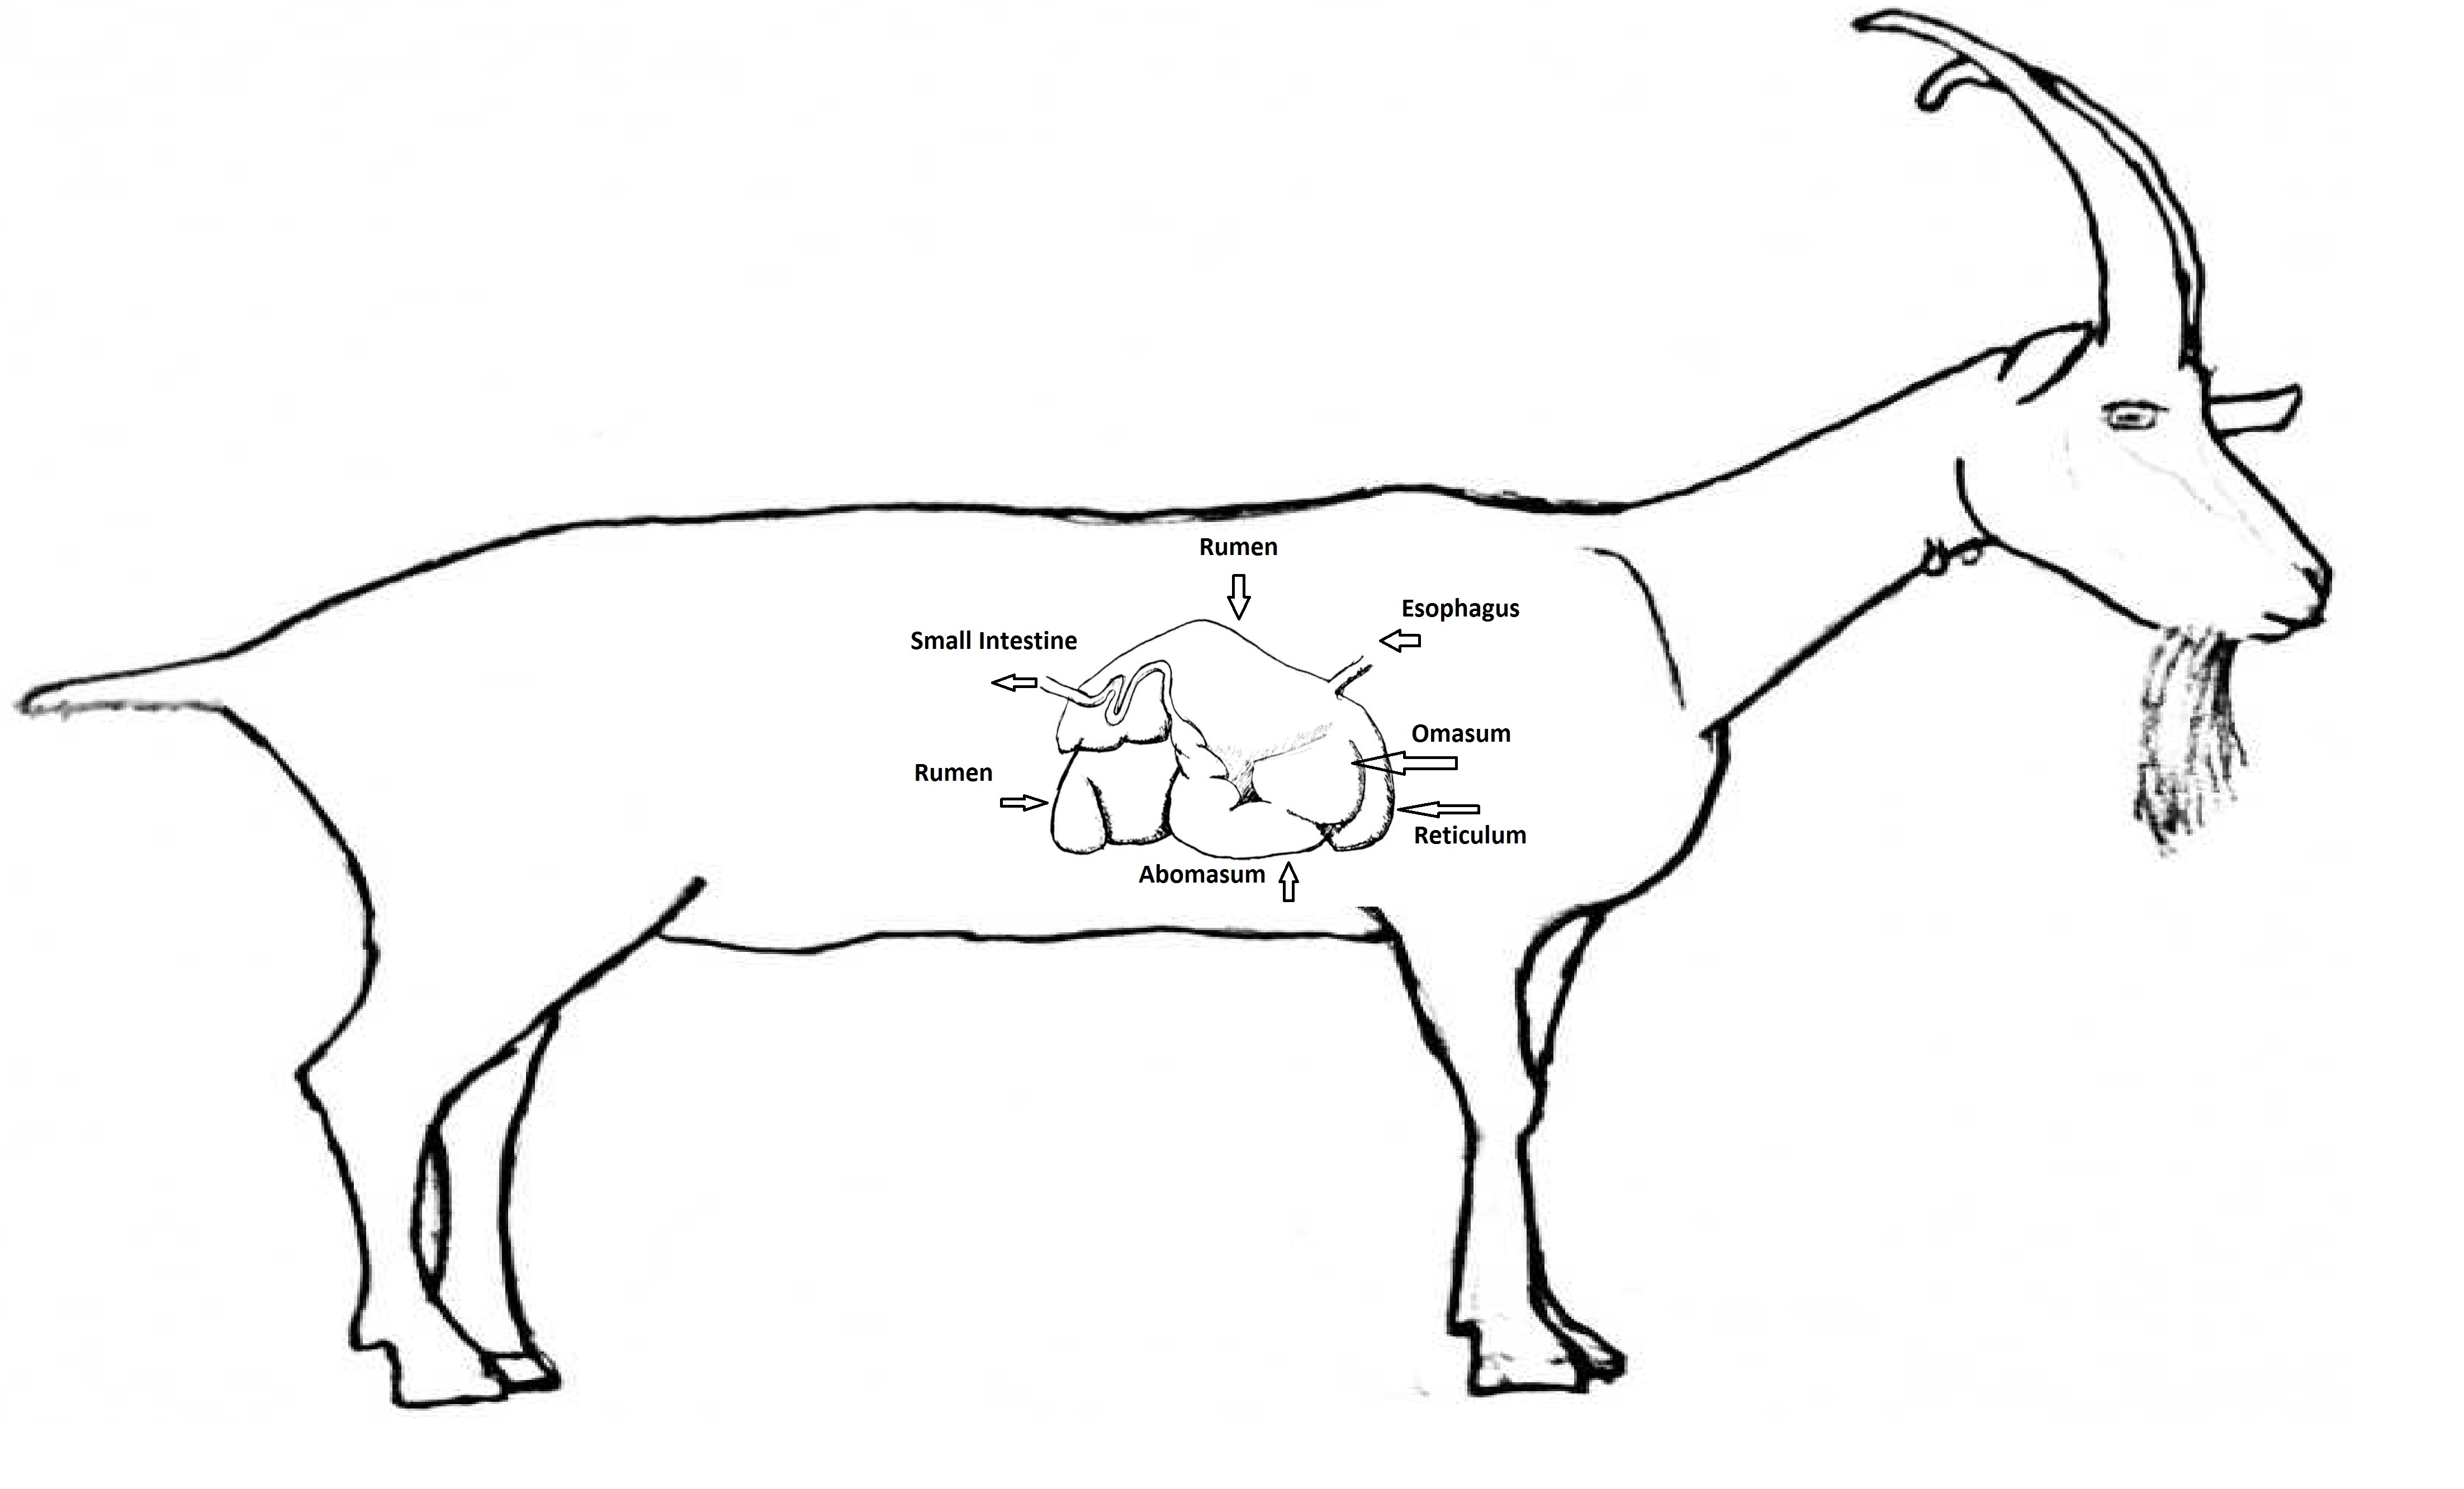 Goat Digestive System: What it is and how it works